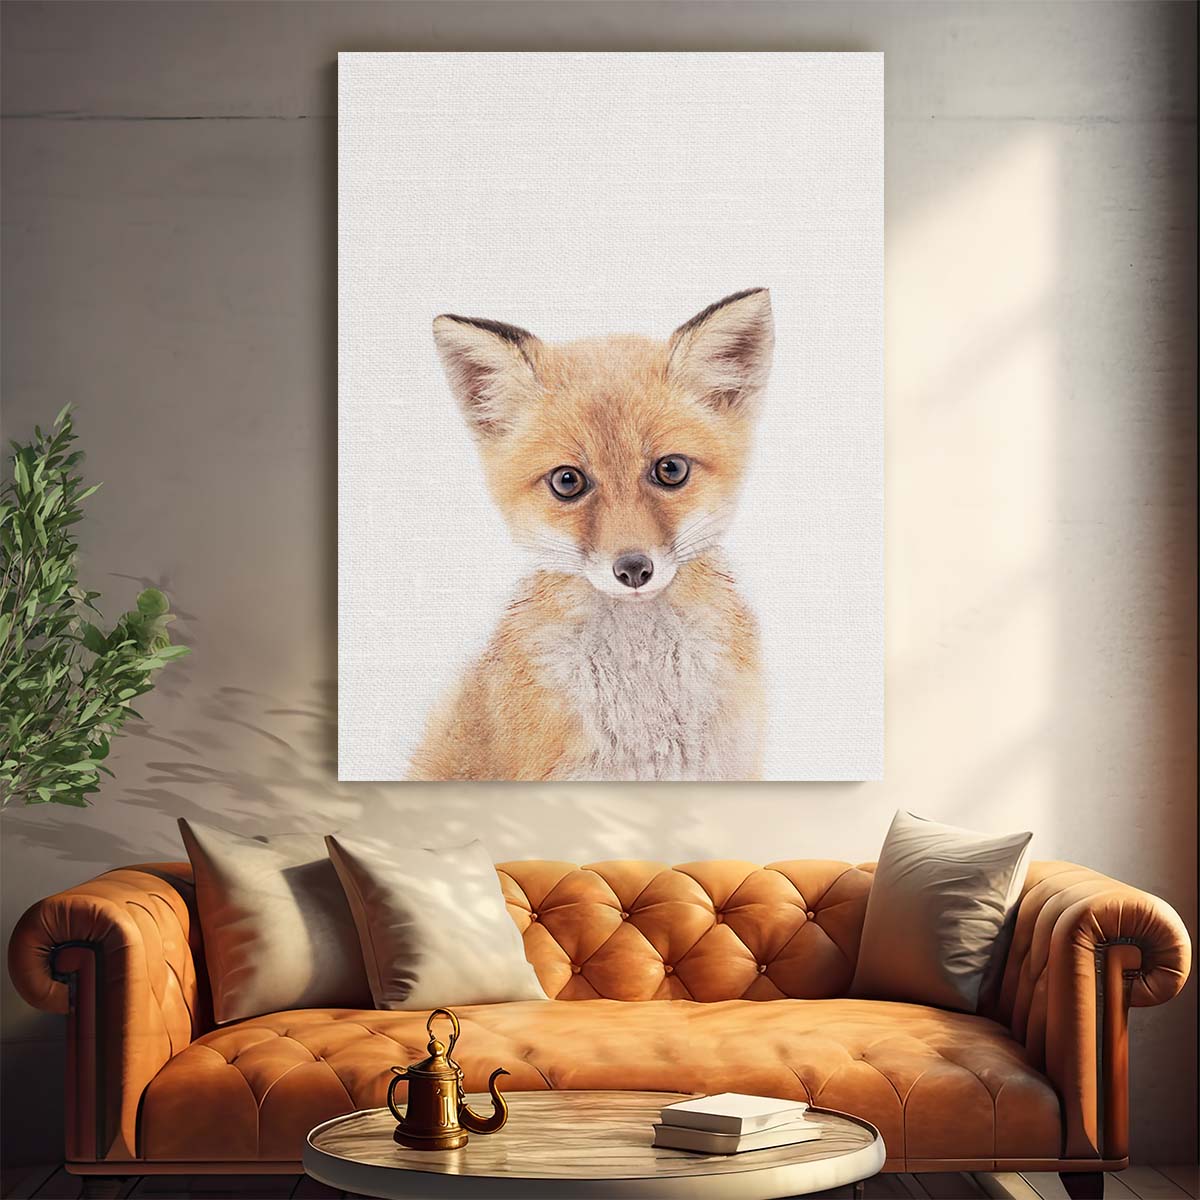 Cute Baby Fox Cub Portrait, Animal Photography by Luxuriance Designs, made in USA